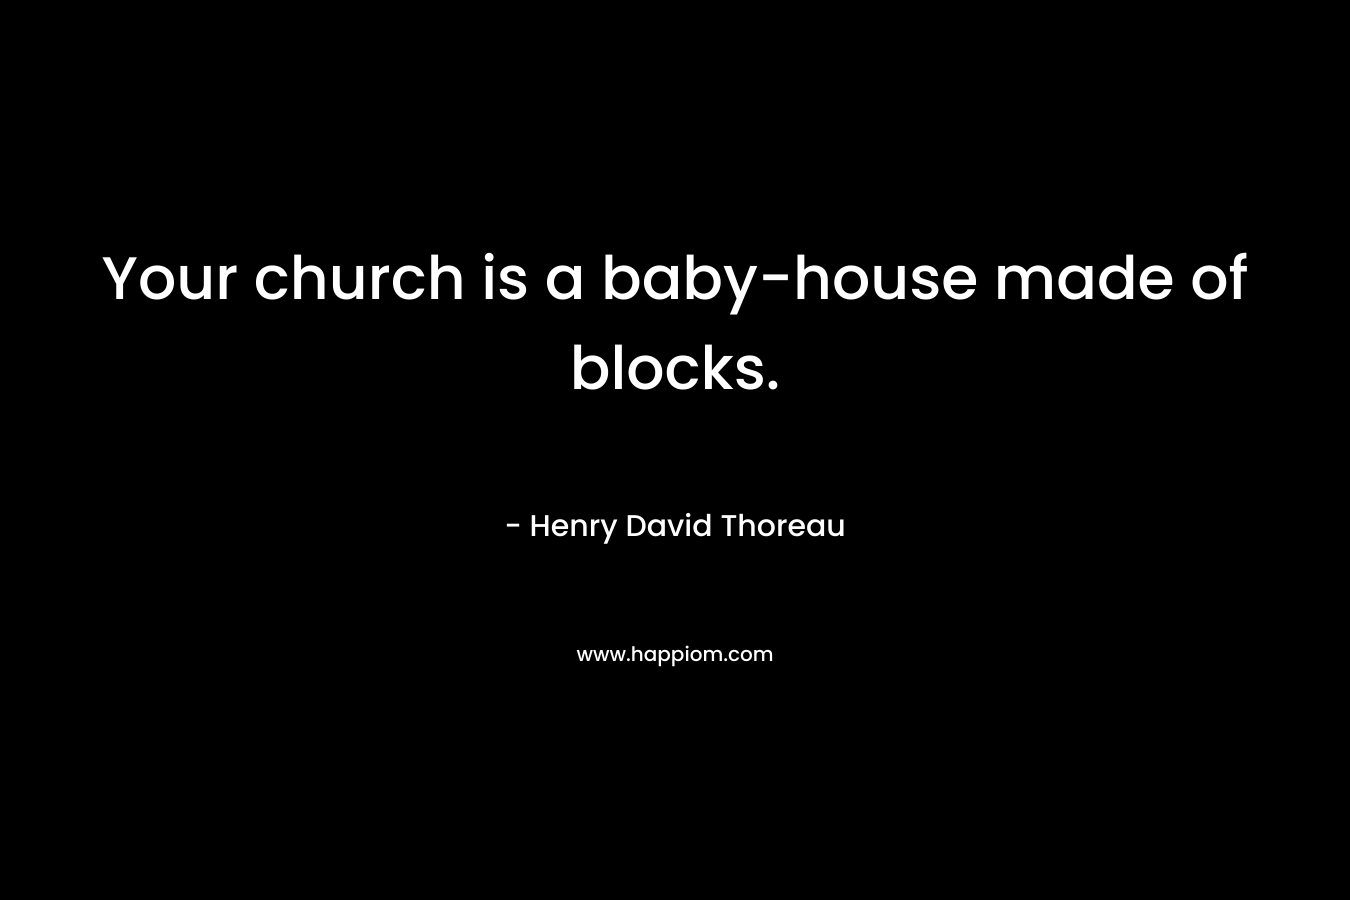 Your church is a baby-house made of blocks.